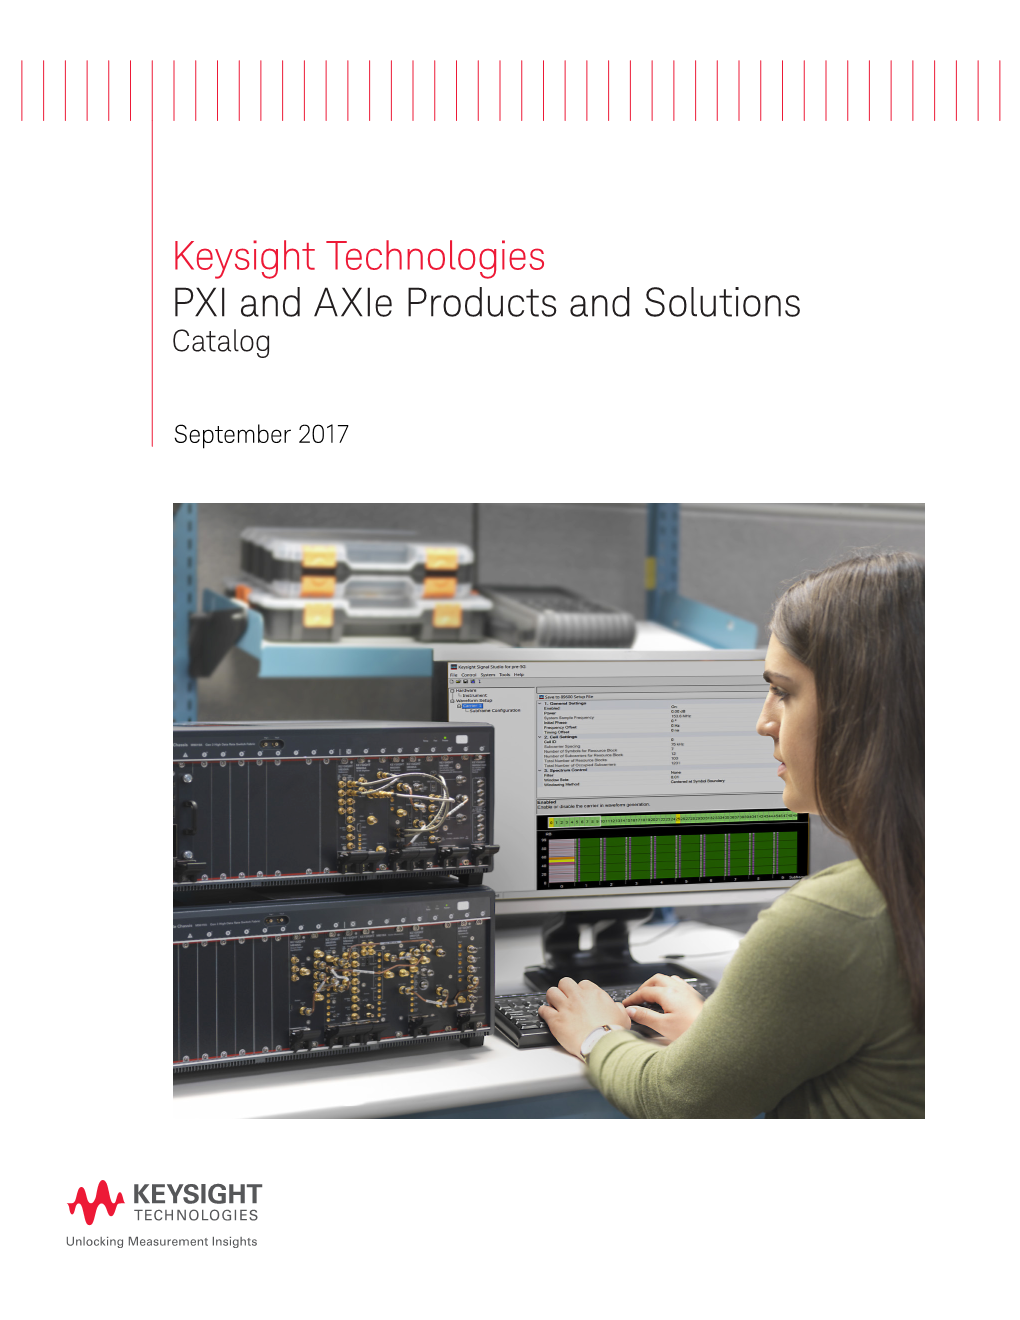 Keysight Technologies PXI and Axie Products and Solutions Catalog